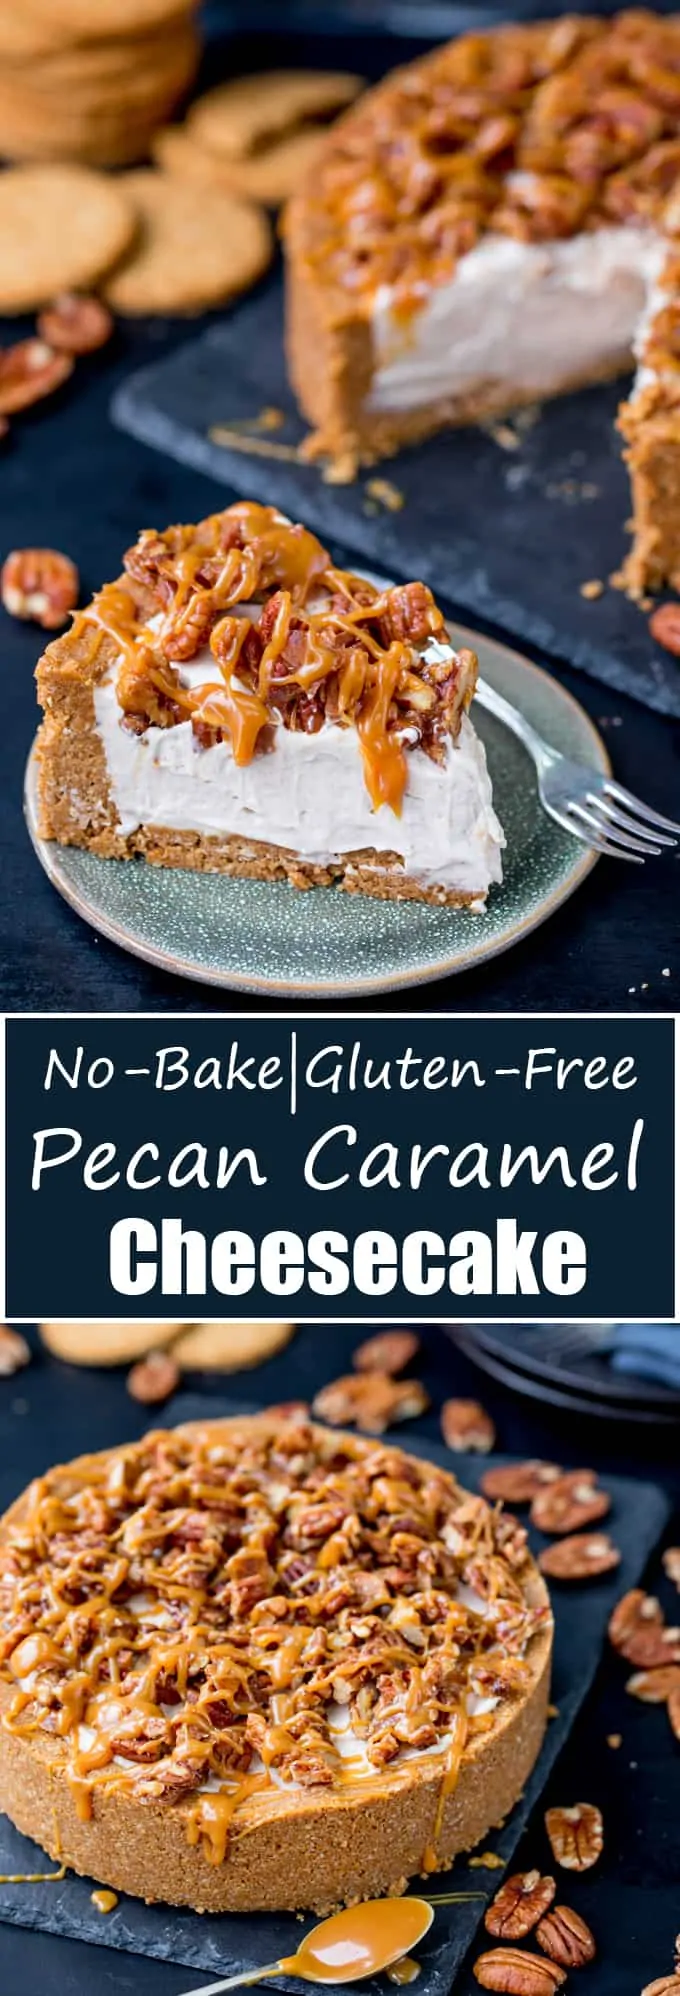 This Winter Spiced Pecan Caramel Cheesecake is an ideal dish for a celebration party table! It's also make ahead, no bake and gluten free! #glutenfreecheesecake #nobakecheesecake #caramelpecan #pecancheesecake #christmasdessert